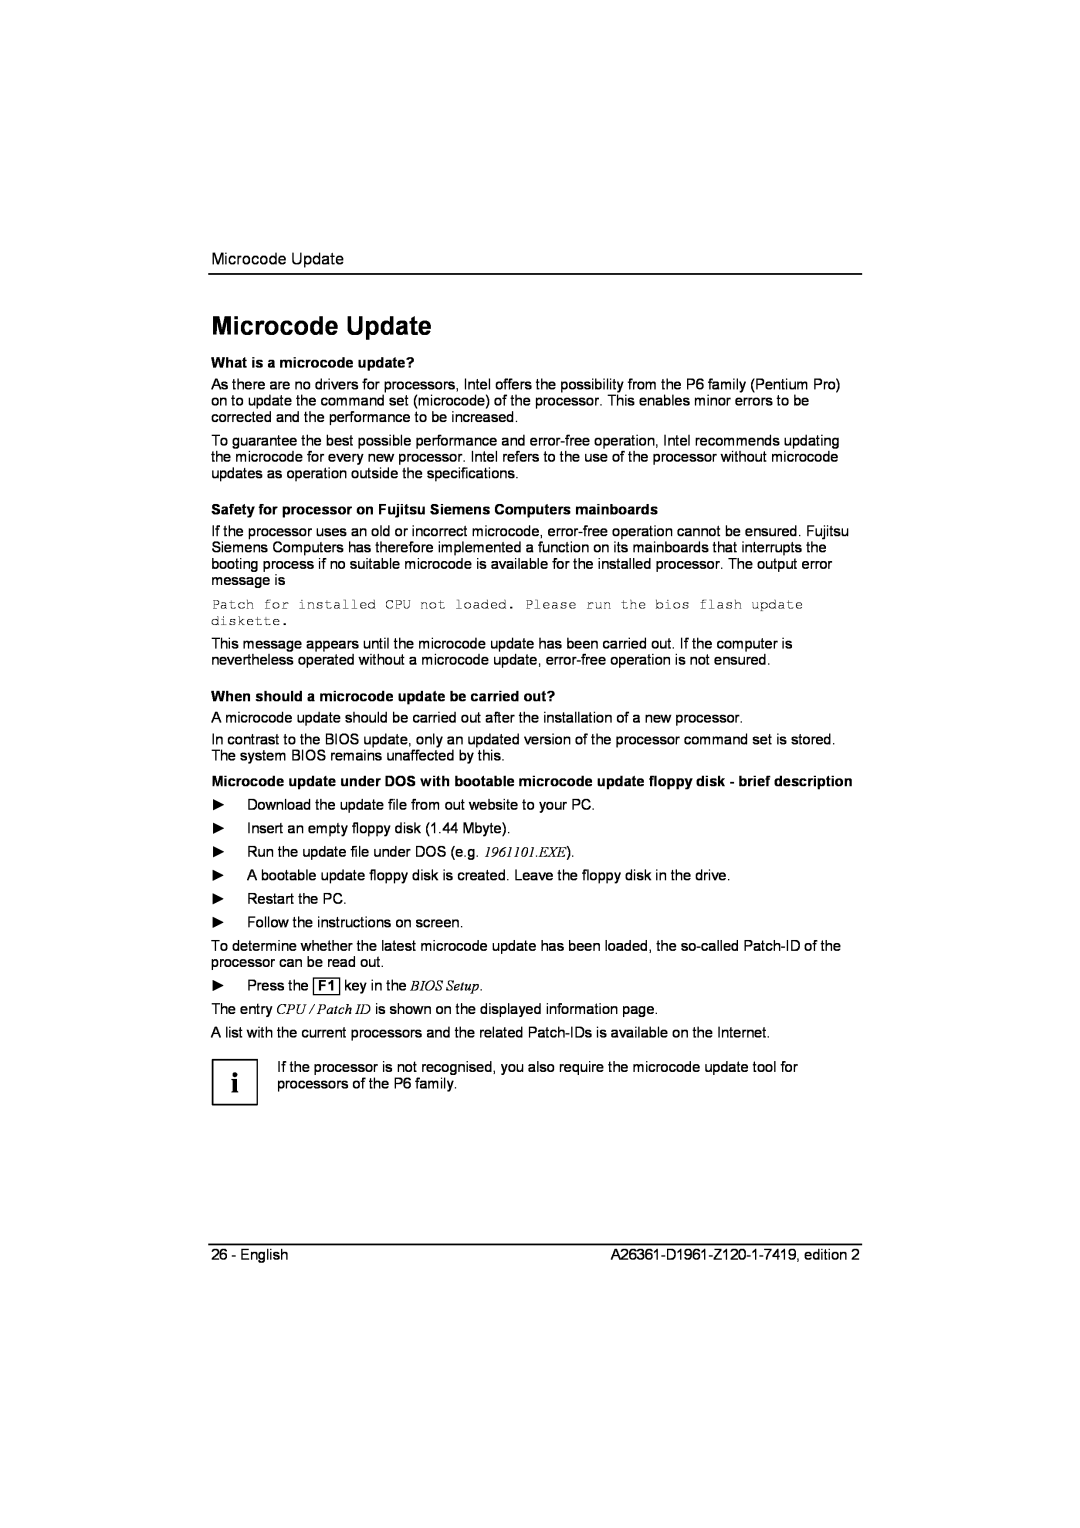 Fujitsu D1961 Microcode Update, What is a microcode update?, Safety for processor on Fujitsu Siemens Computers mainboards 